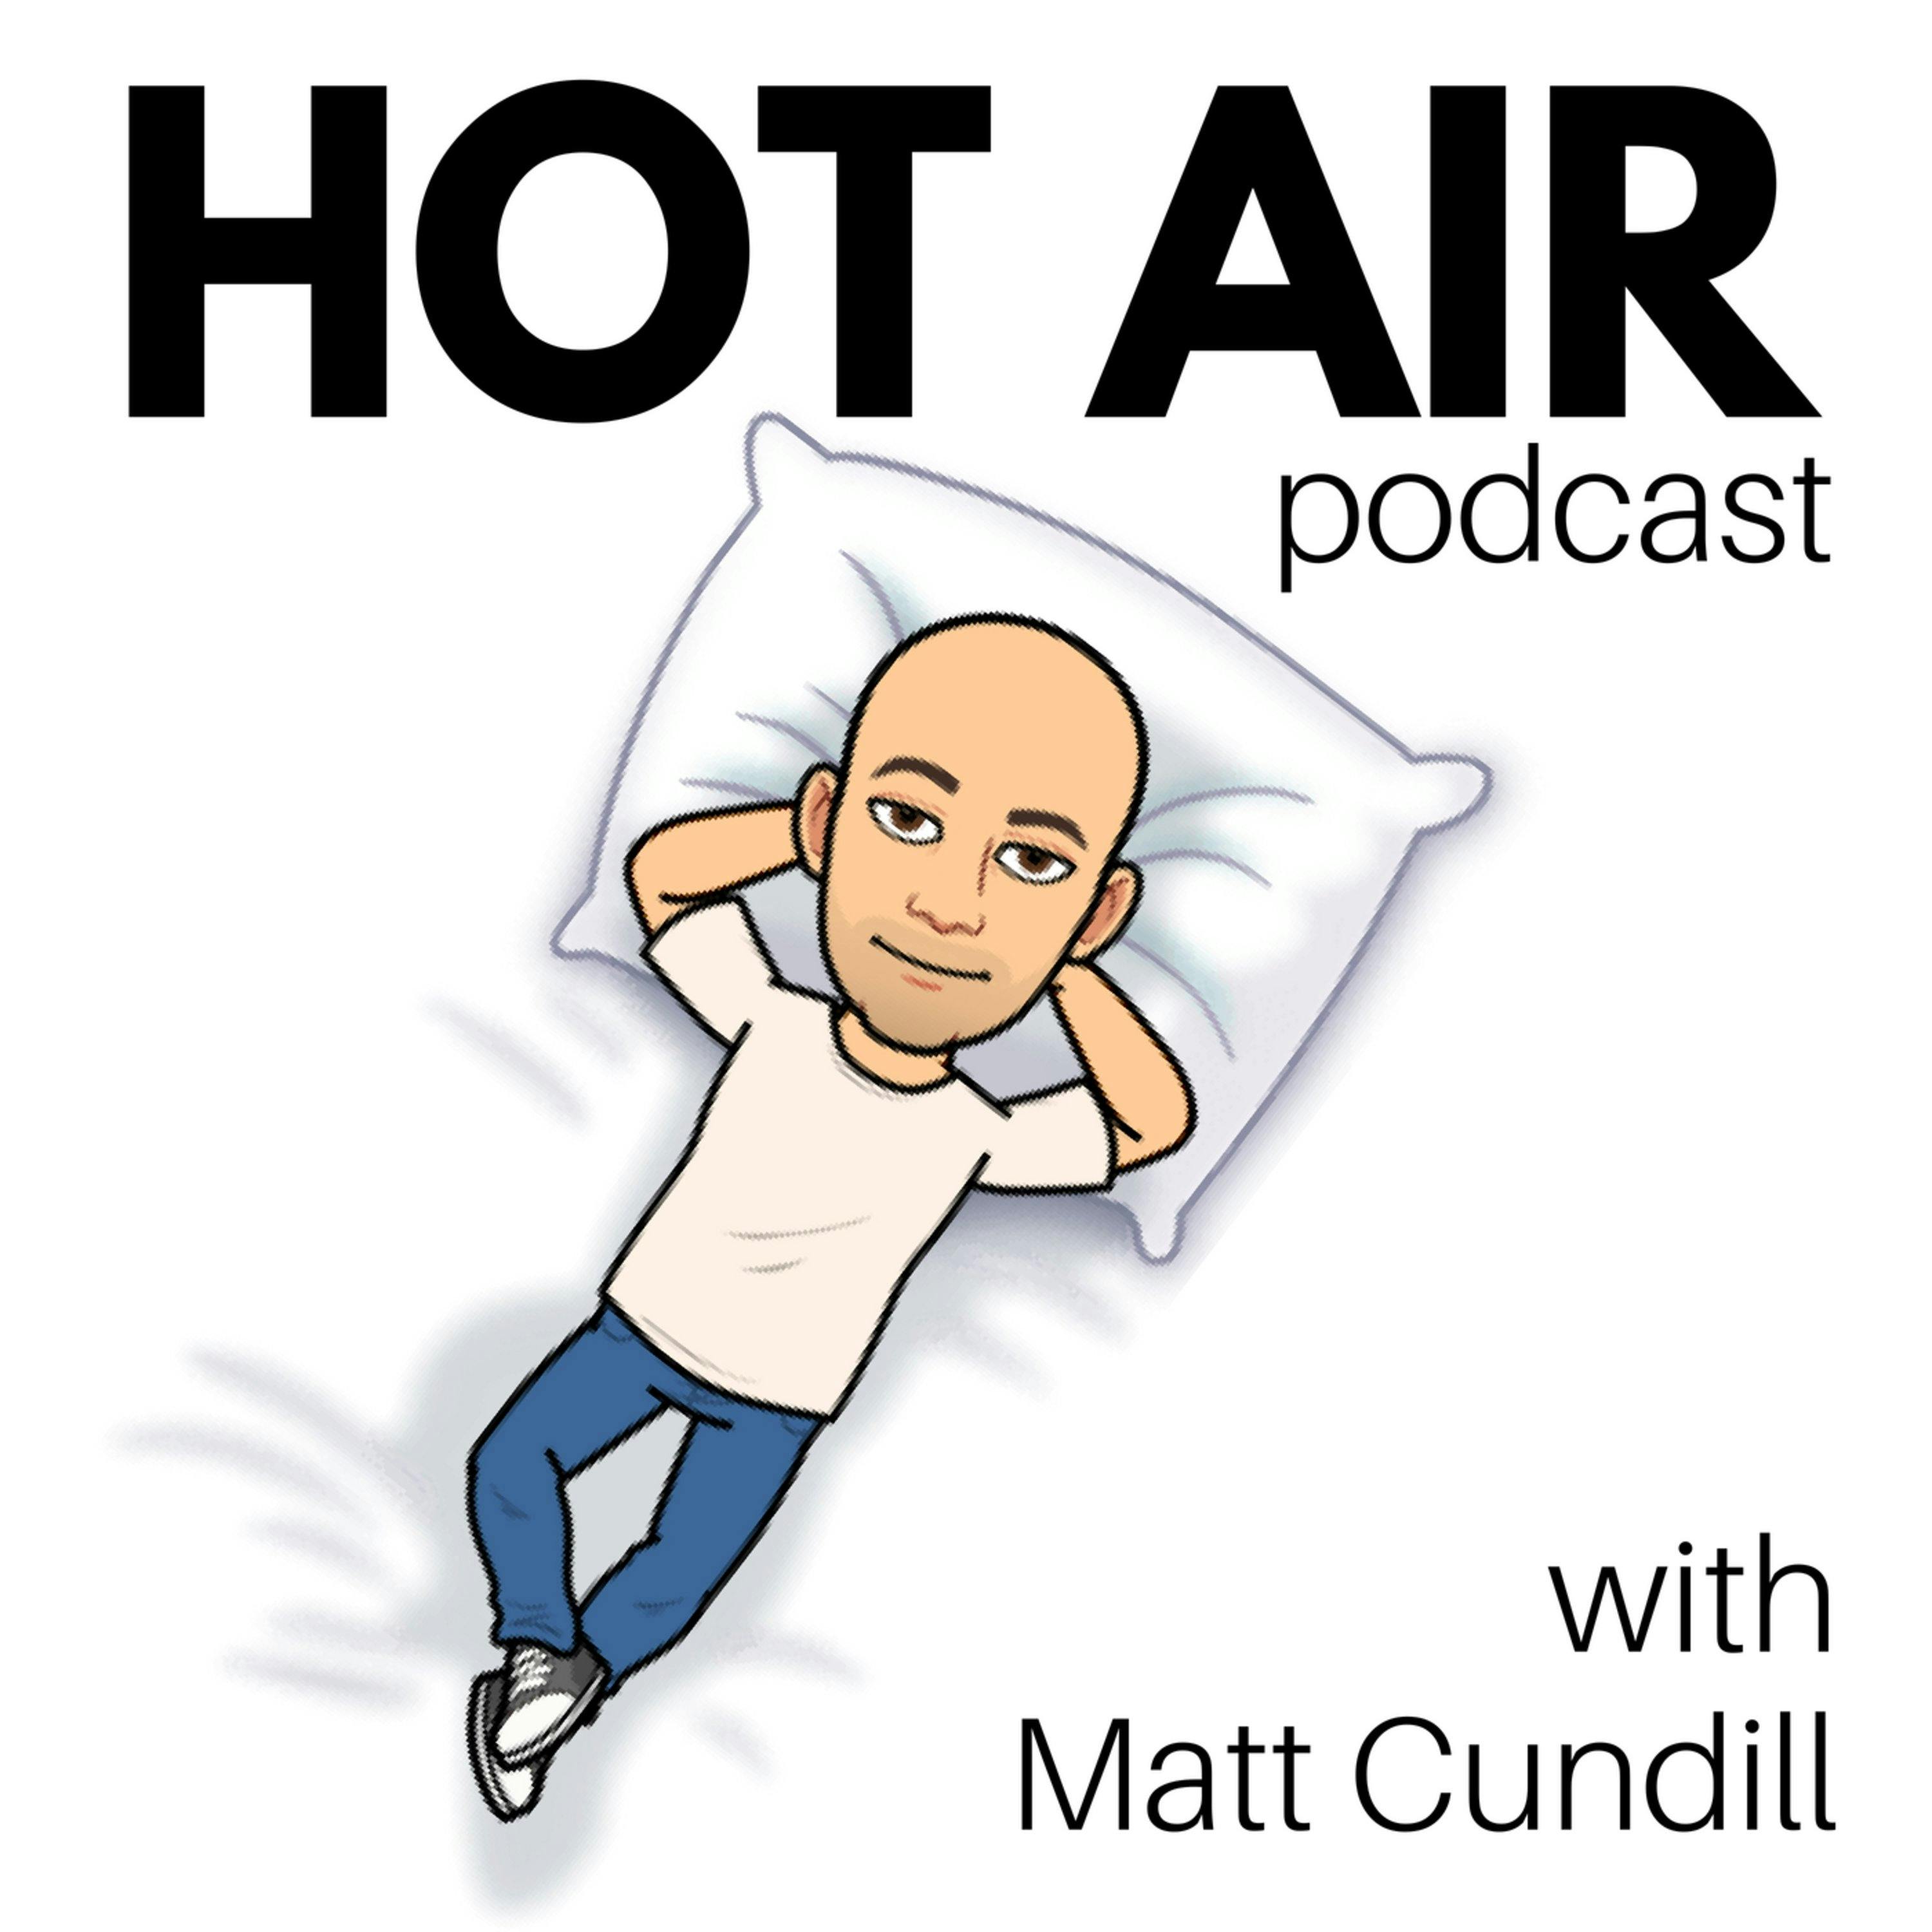 Hot Air Podcast Trailer